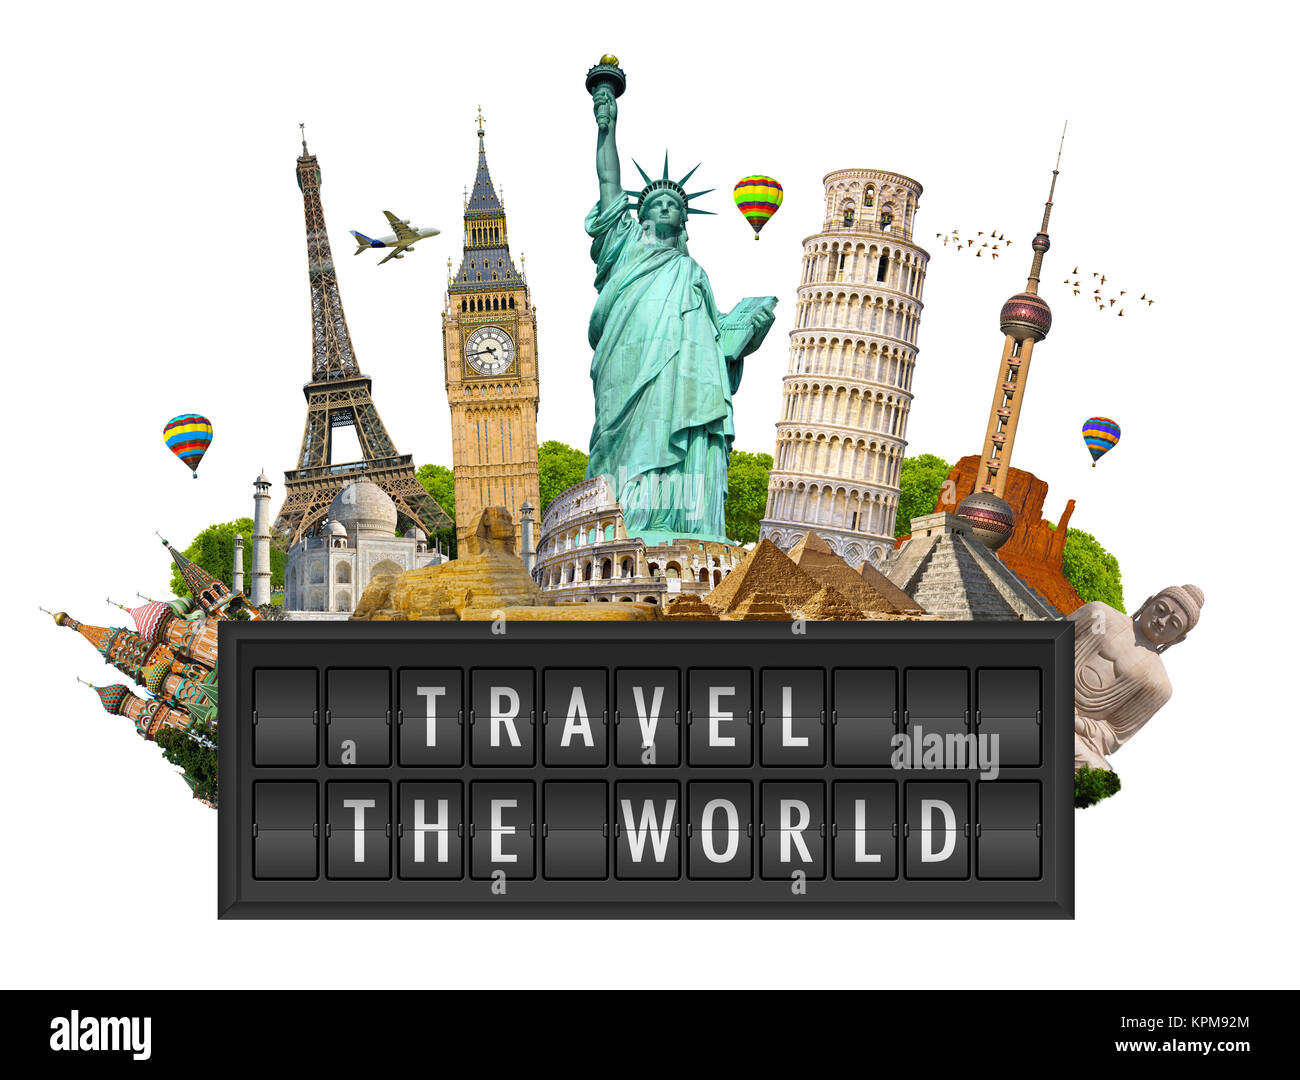 Monuments of the world on a airport billboard panel Stock Photo